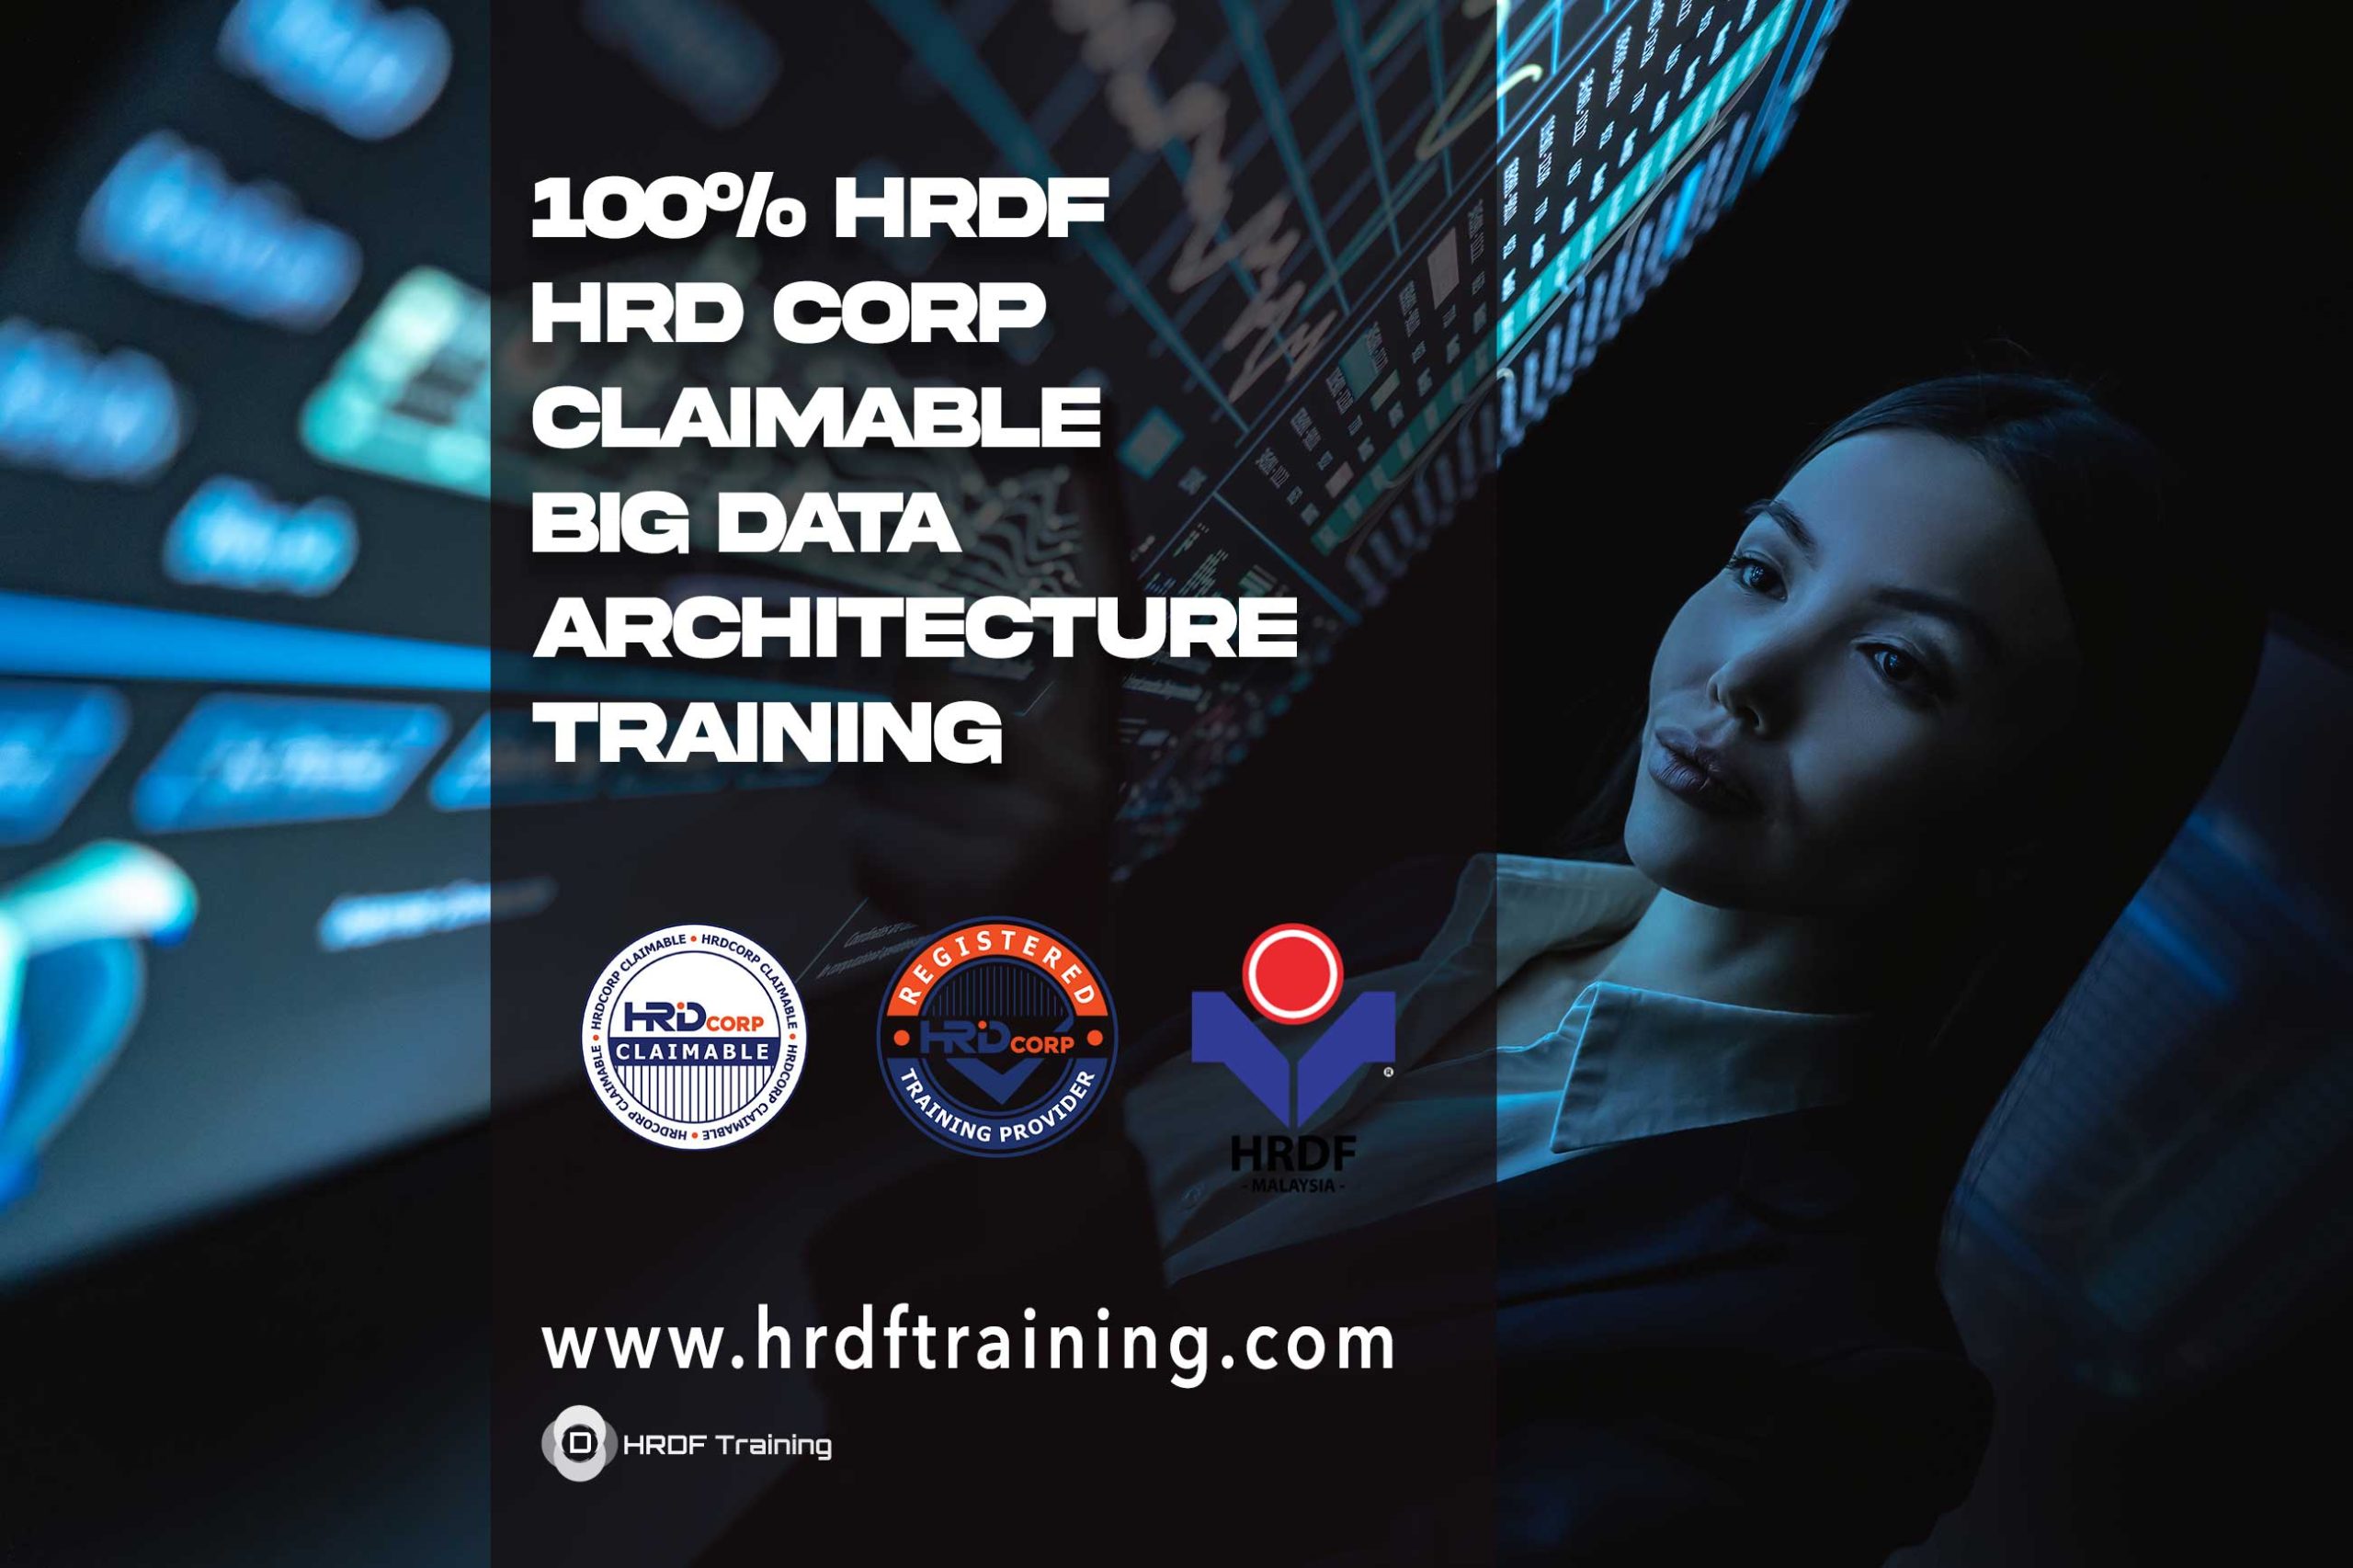 HRDF-HRD-Corp-Claimable-Big-Data-Architecture-Training